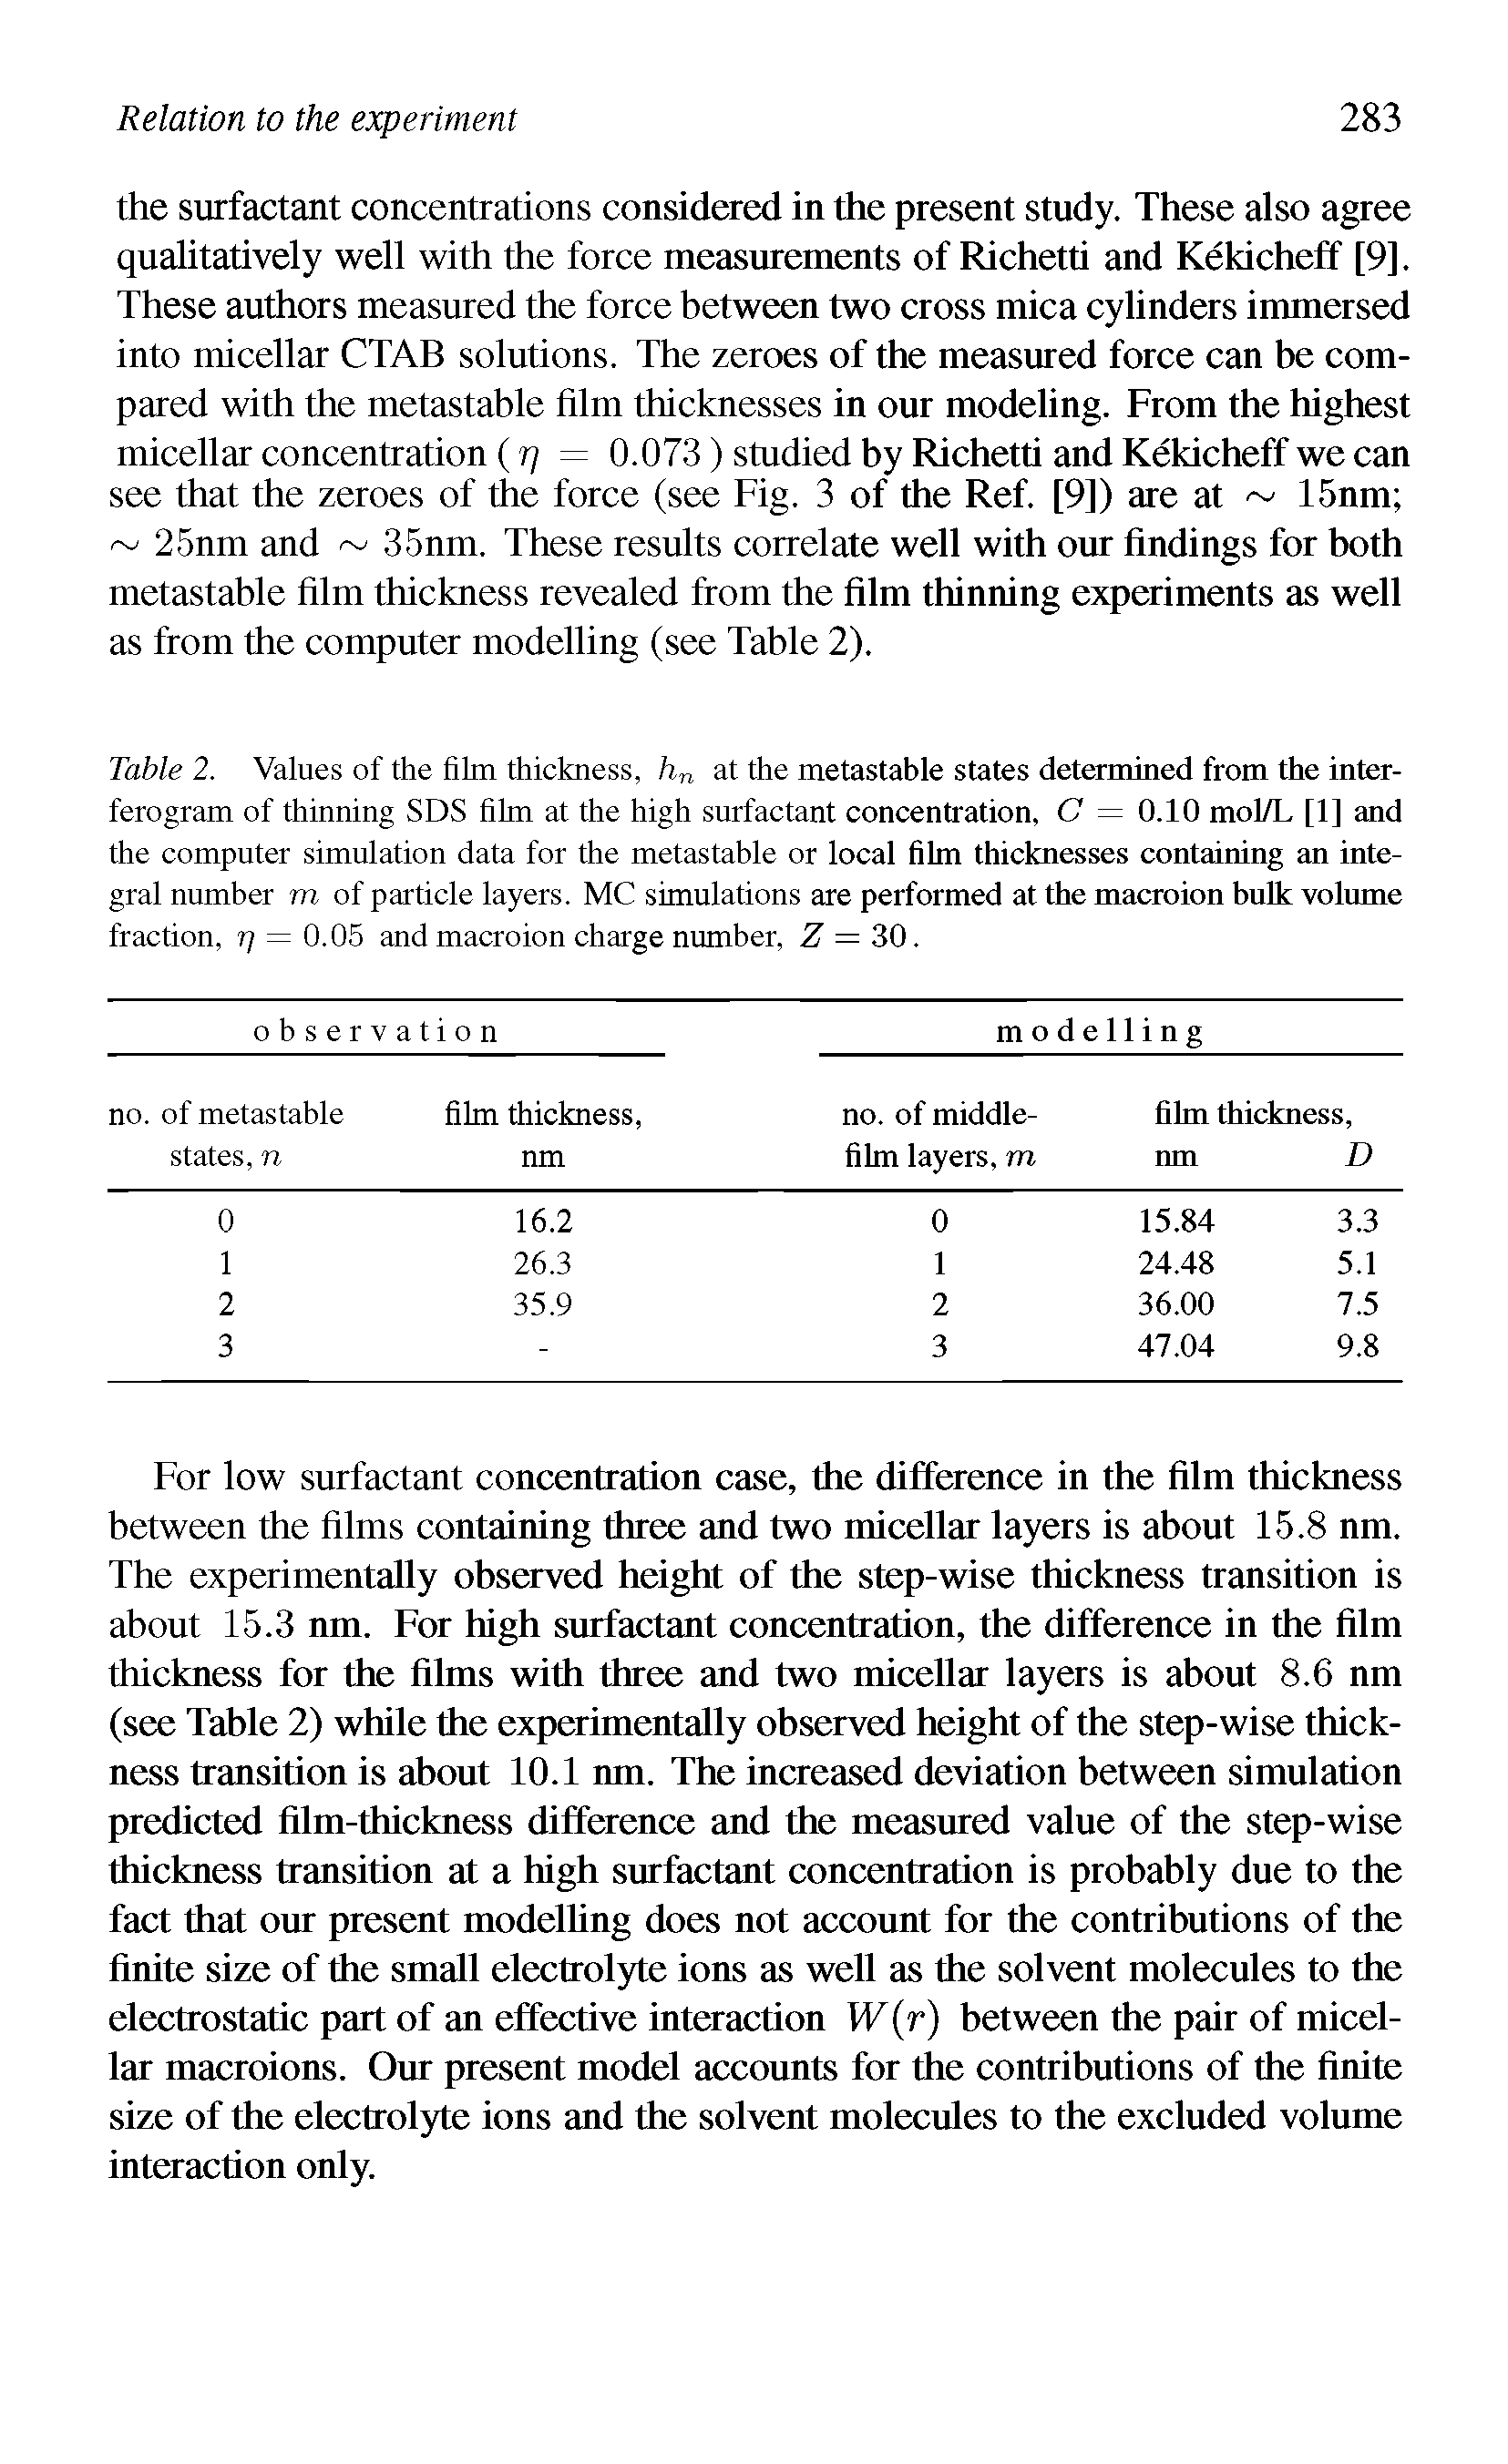 Table 2. Values of the film thickness, h at the metastable states determined from the inter-ferogram of thinning SDS film at the high surfactant concentration, C = 0.10 mol/L [1] and the computer simulation data for the metastable or local film thicknesses containing an integral number m of particle layers. MC simulations are performed at the macroion bulk volume fraction, rj = 0.05 and macroion charge number, Z = 30.